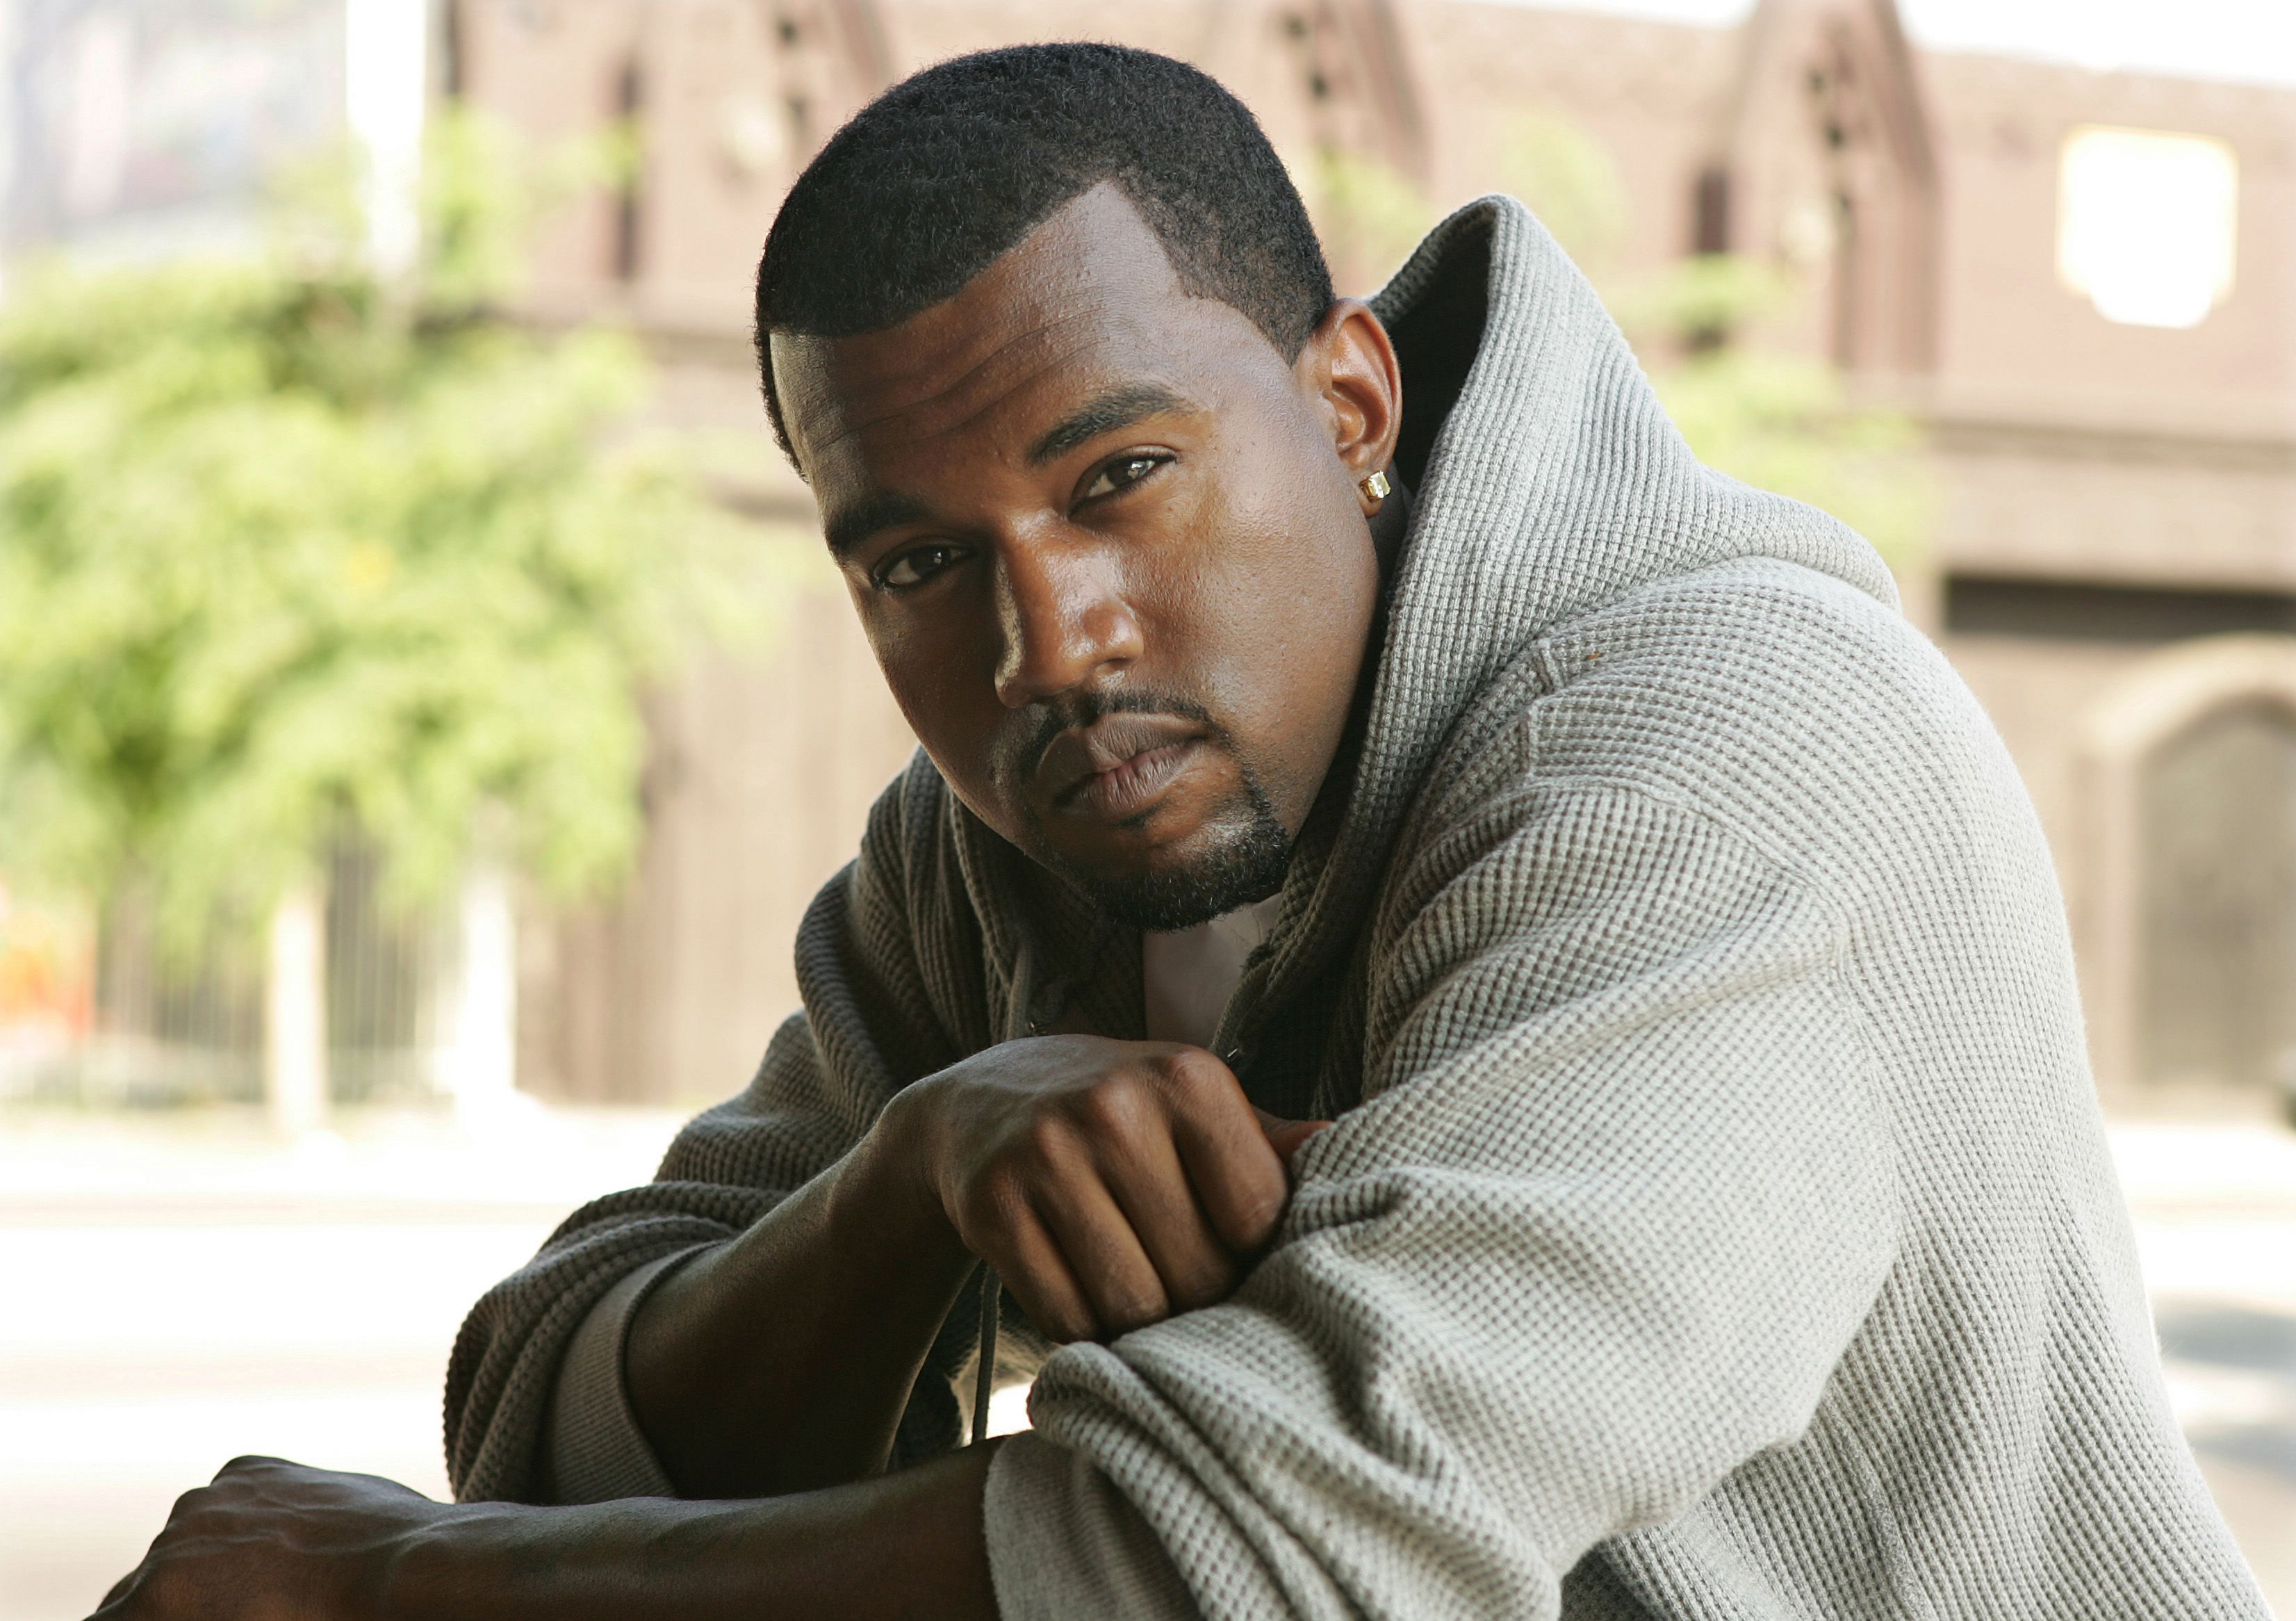 Kanye West poses for a photo outdoors, July 29, 2005 in Los Angeles, California. | Source: Getty Images